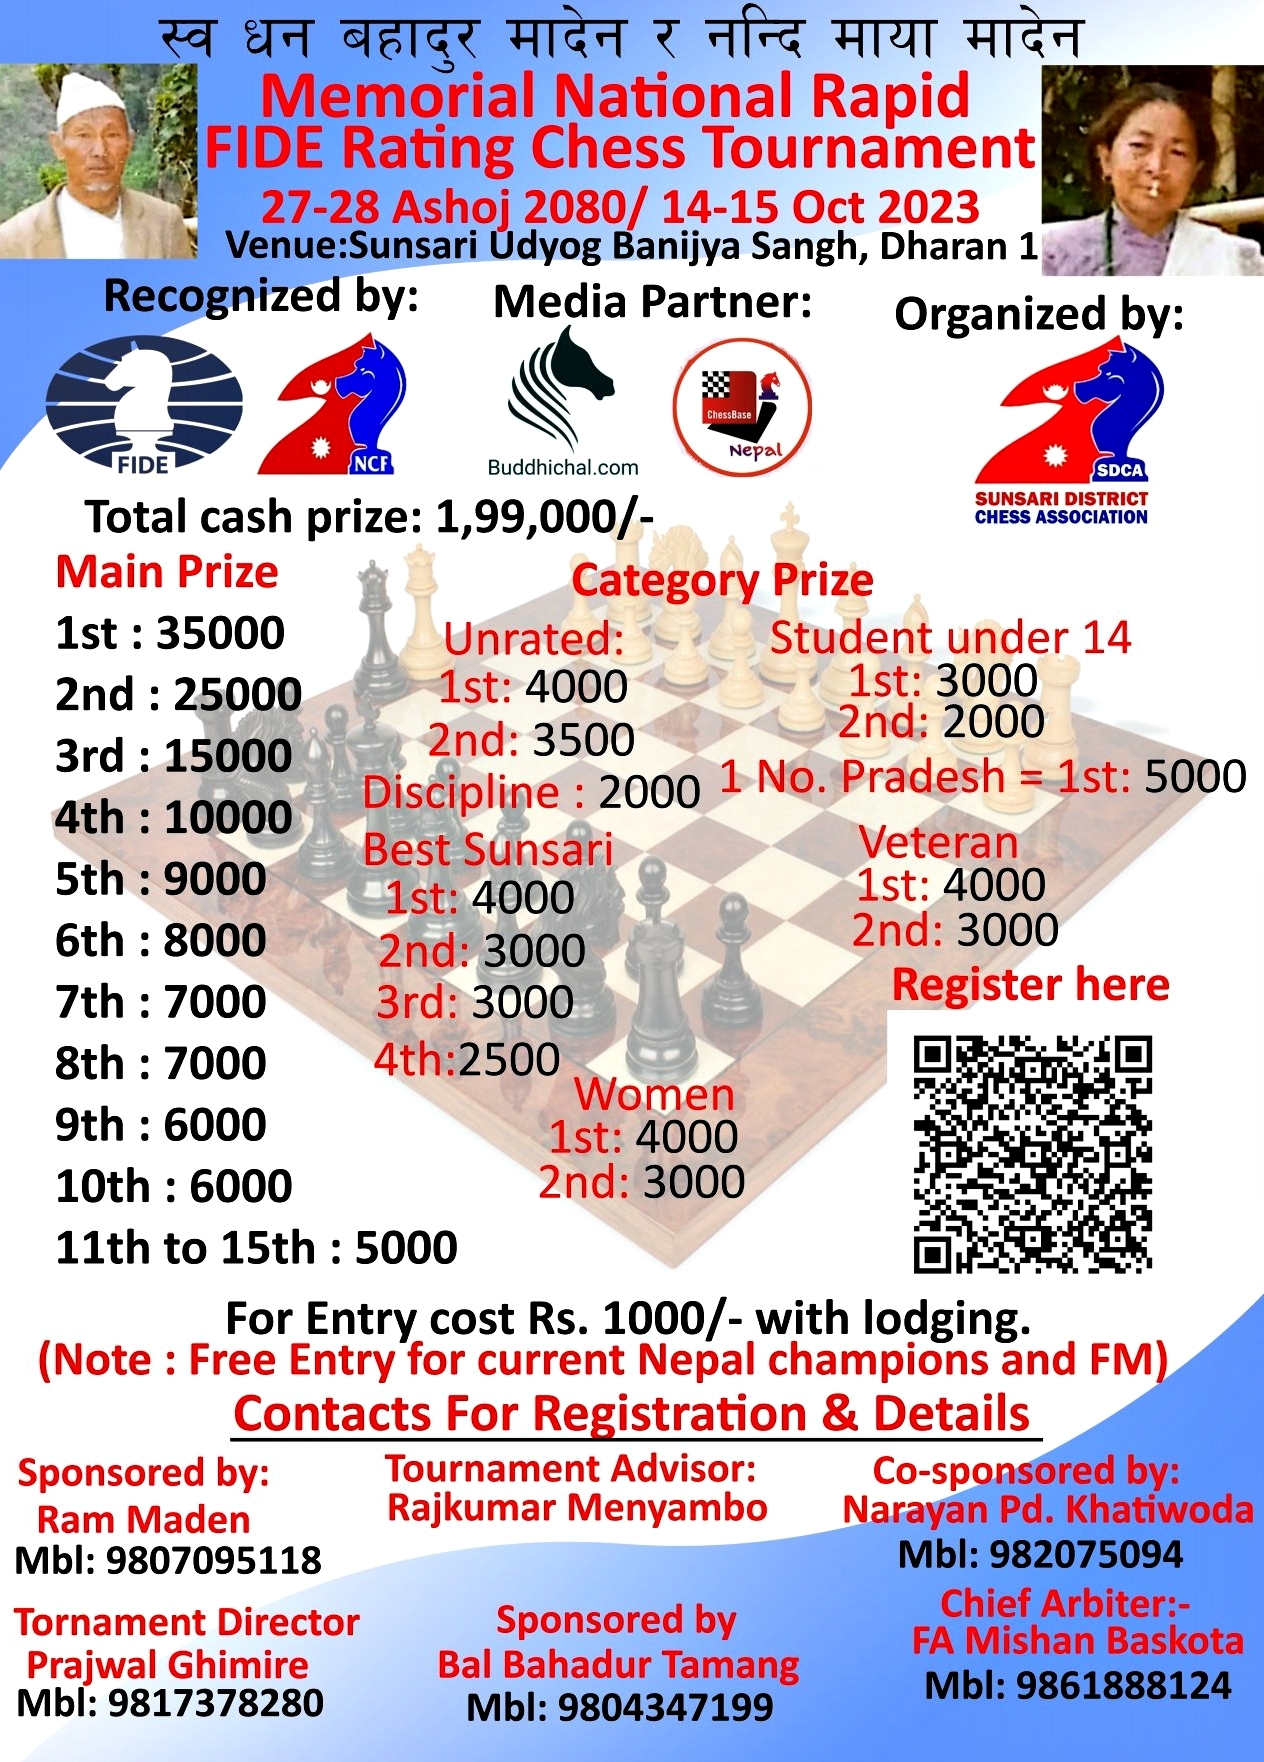 ChessBase Nepal on X: FIDE Rating Chess Tournament at Butwal 2nd